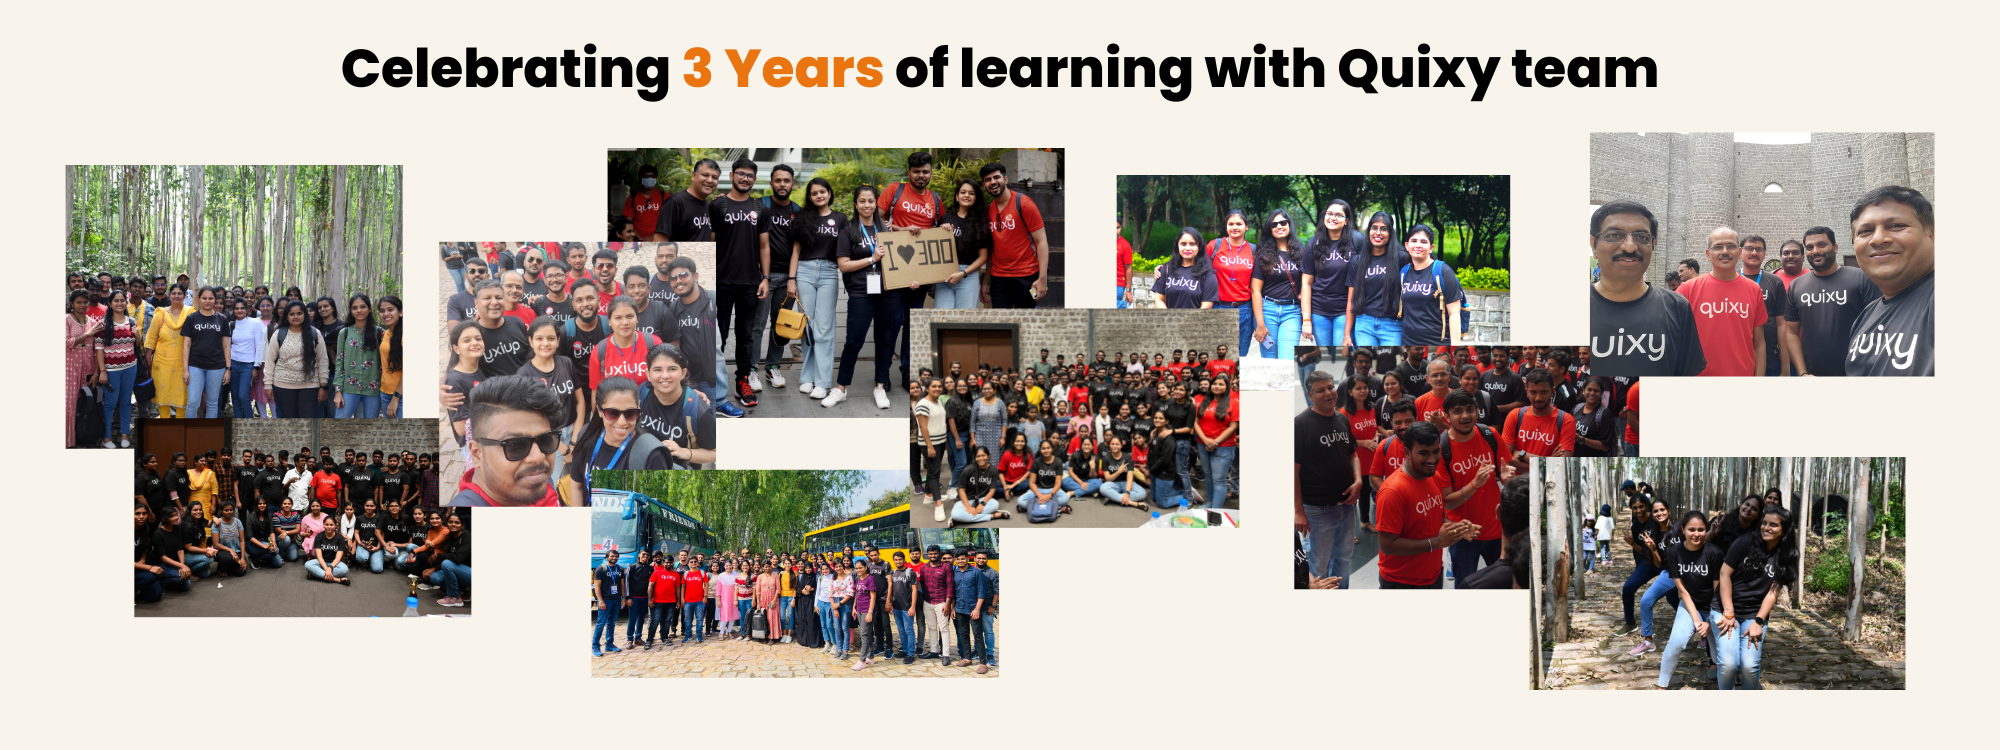 Celebrating 3 Years of learning with Quixy team